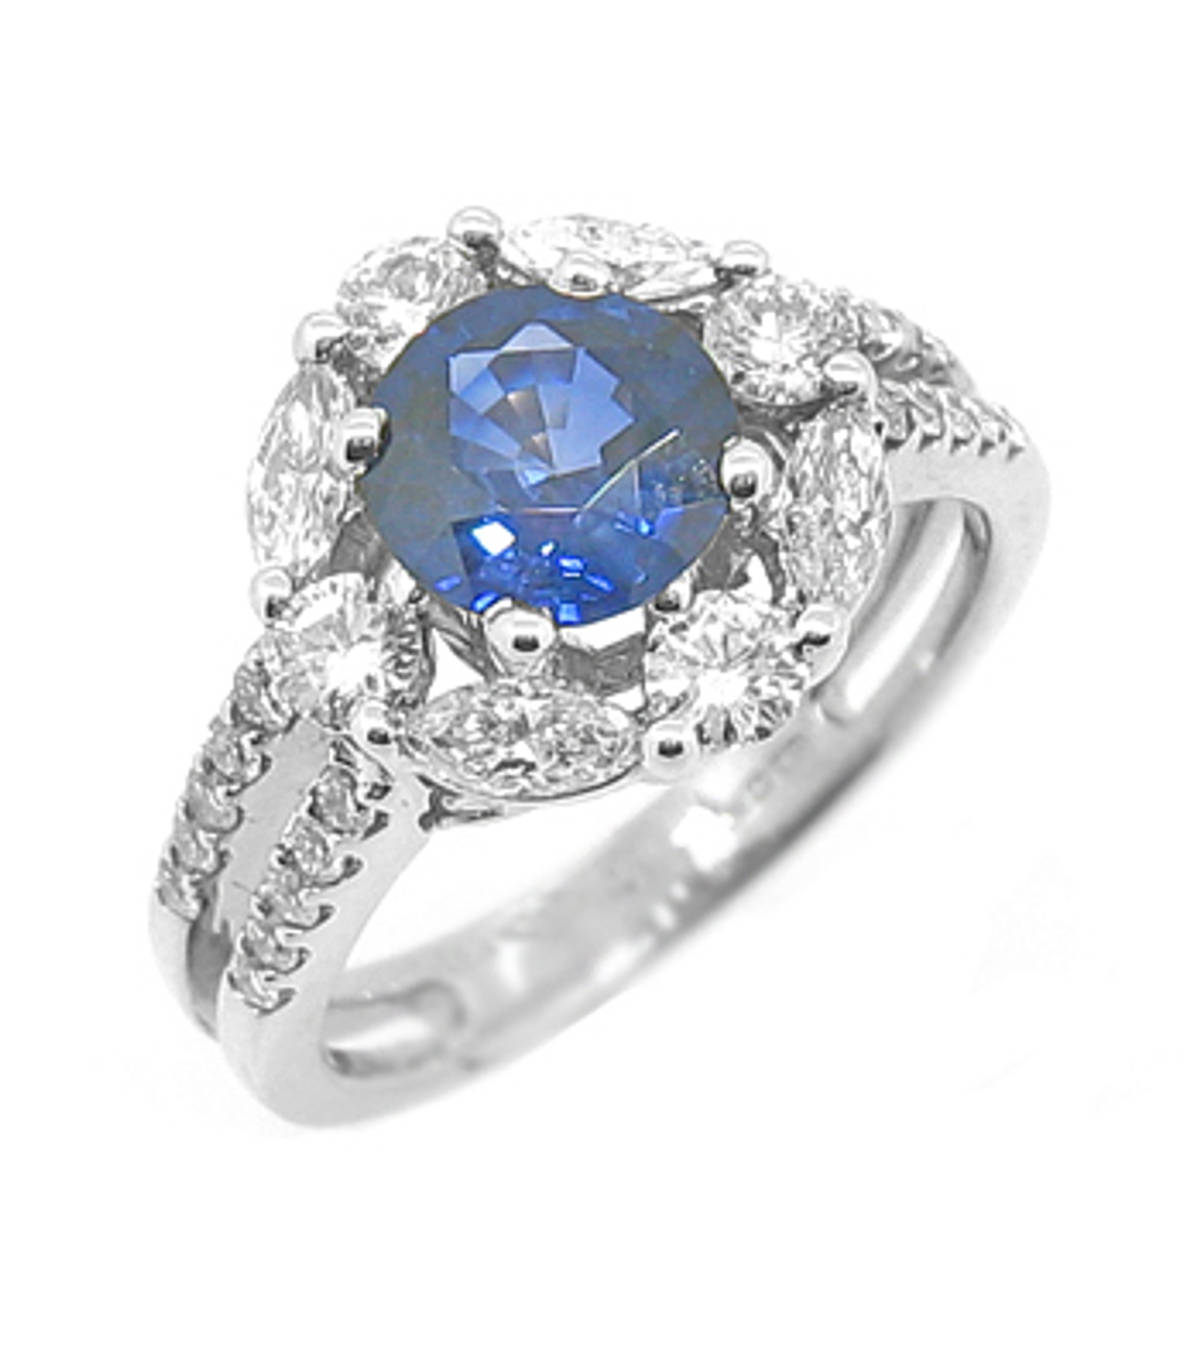 Sapphire and diamond cluster ring with double row diamond shouldersPictured item: 1.55cts sapphire/0.96cts diamonds set in 18k white gold